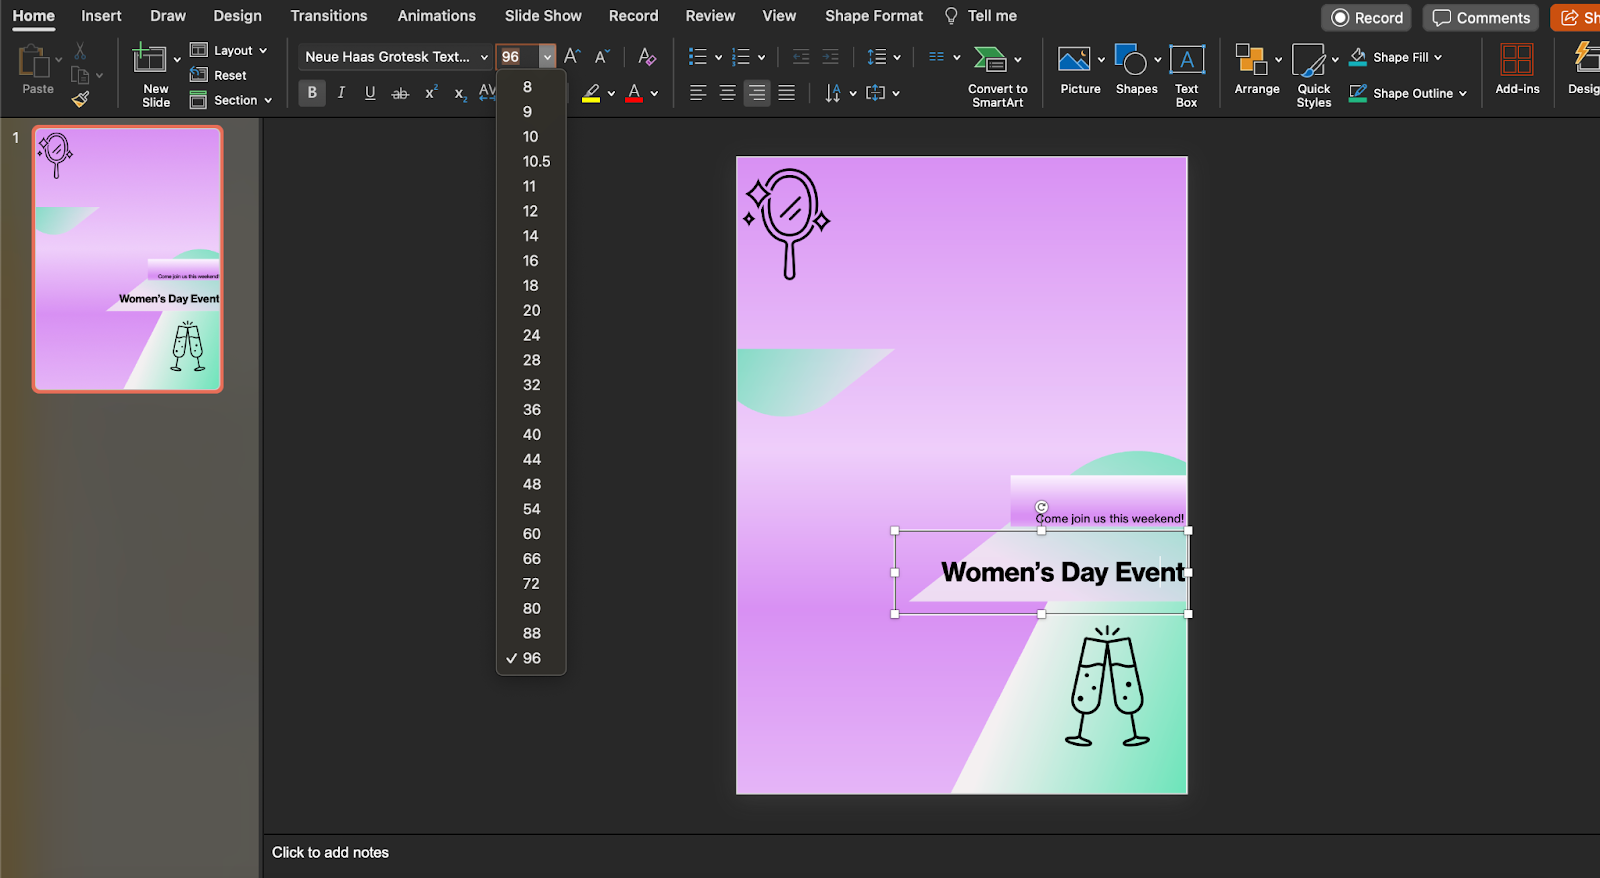 Powerpoint slide for Women's day event